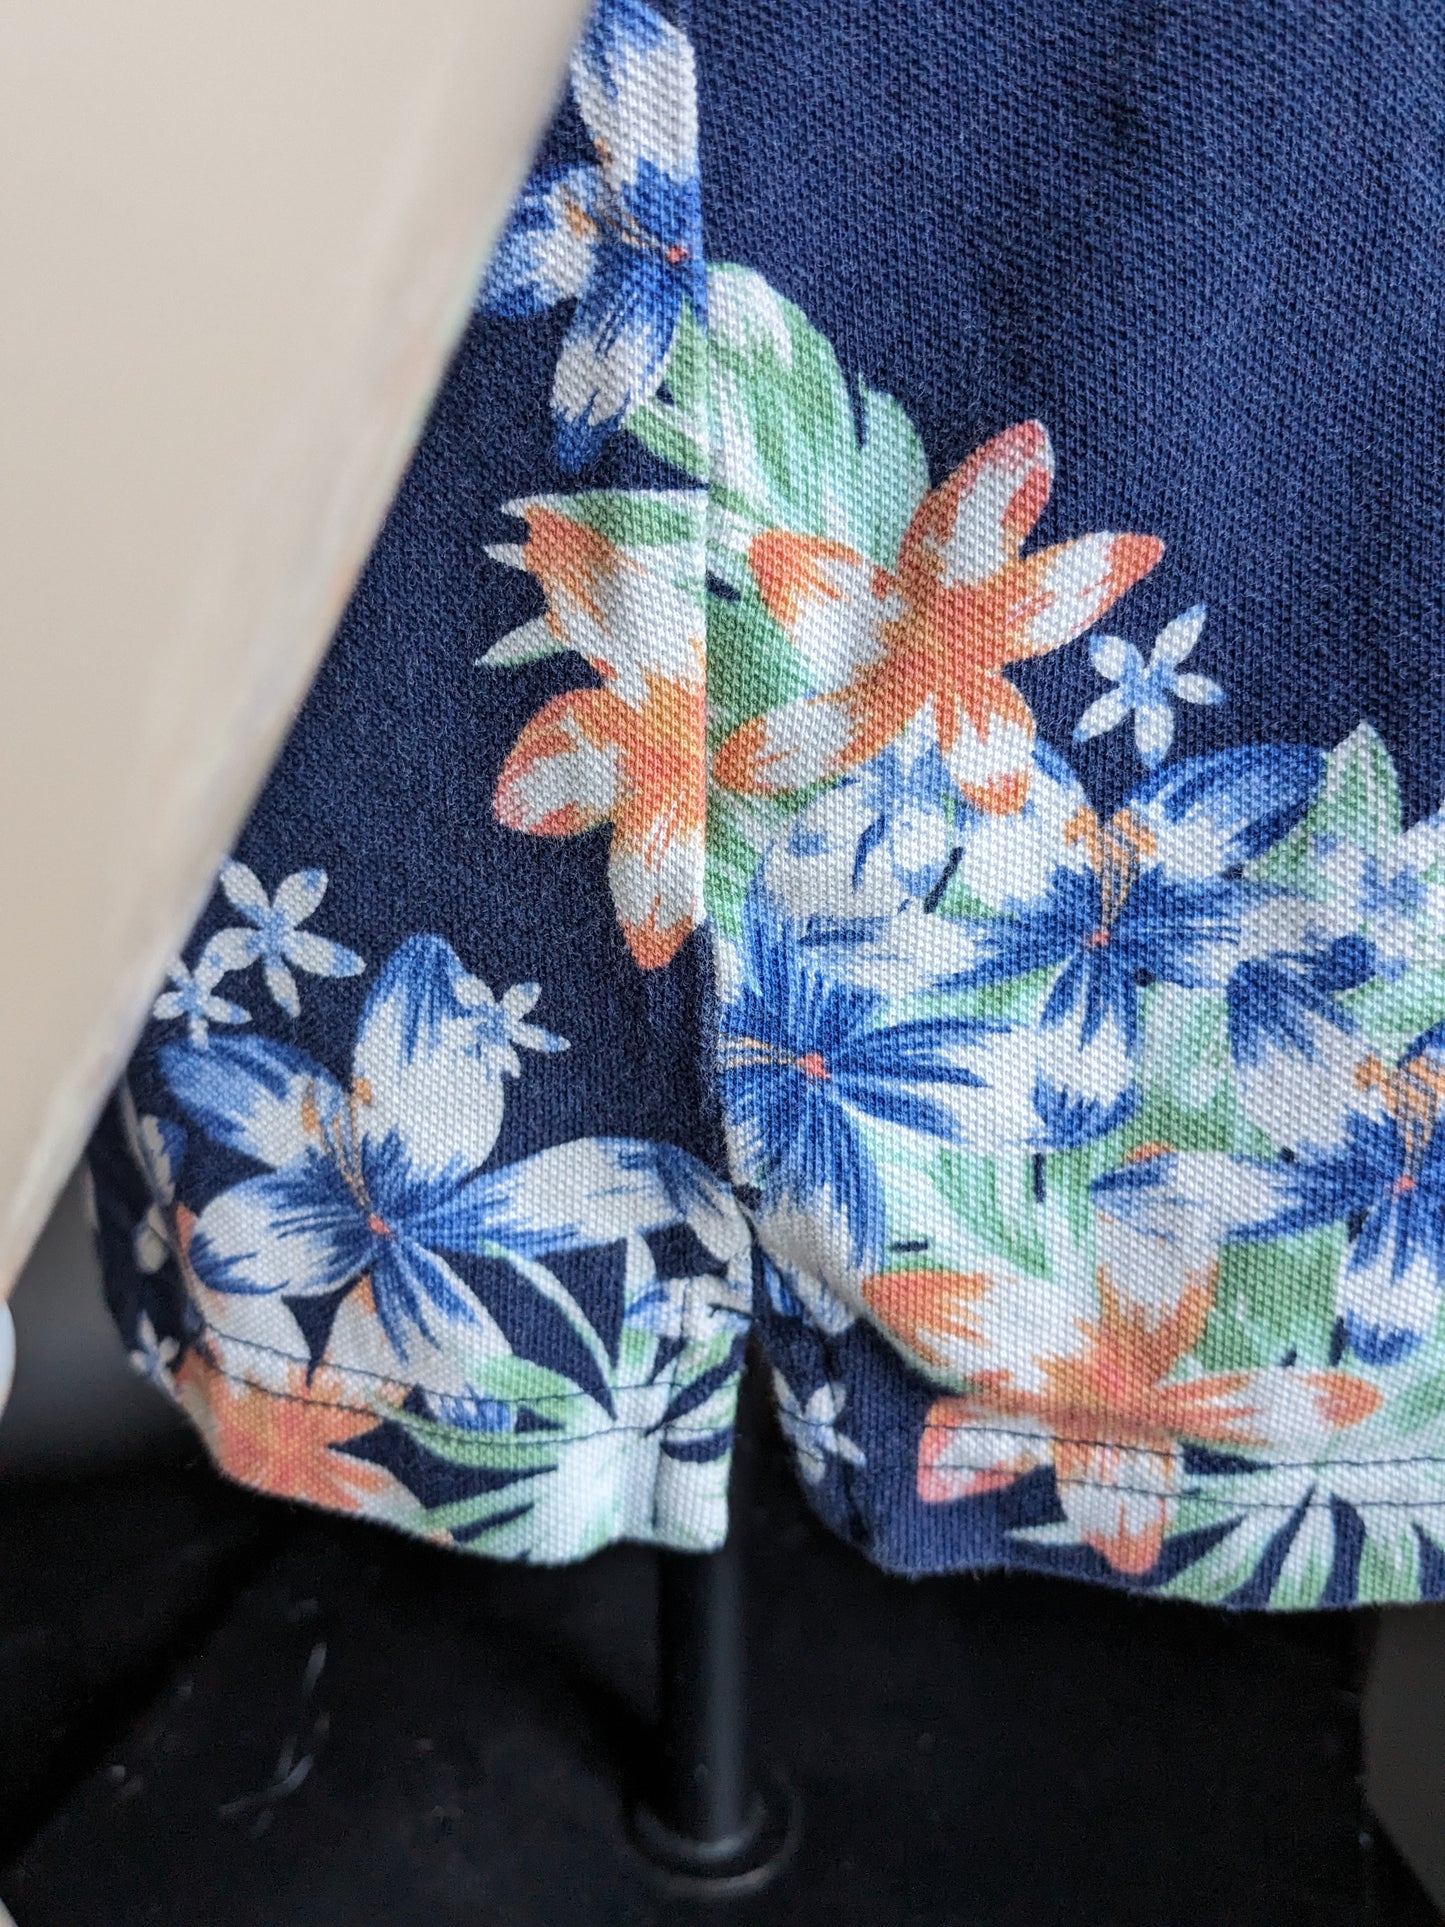 Lands' End Polo. Blue Green Orange Flowers Print. Size L. Traditional Fit.